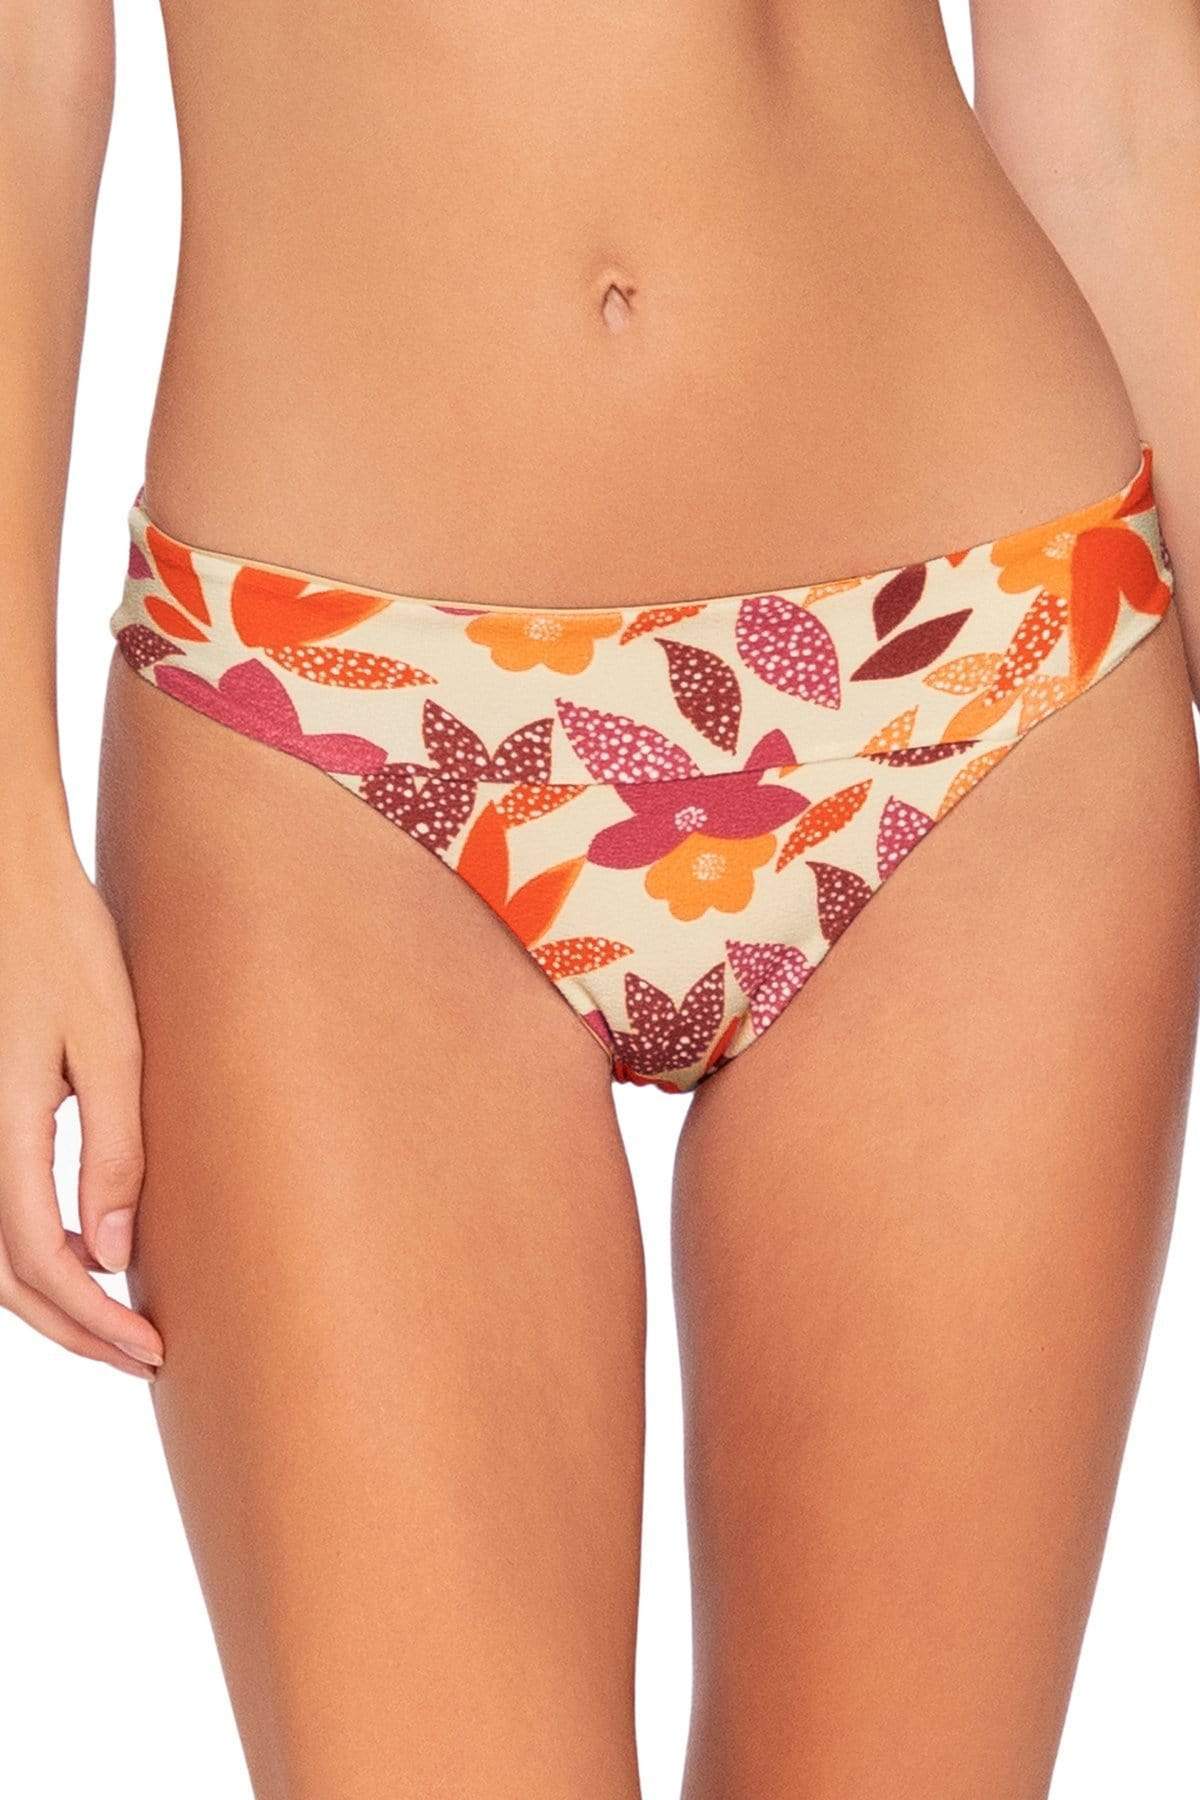 Bestswimwear -  Swim Systems Pressed Petals Bliss Banded Bottom